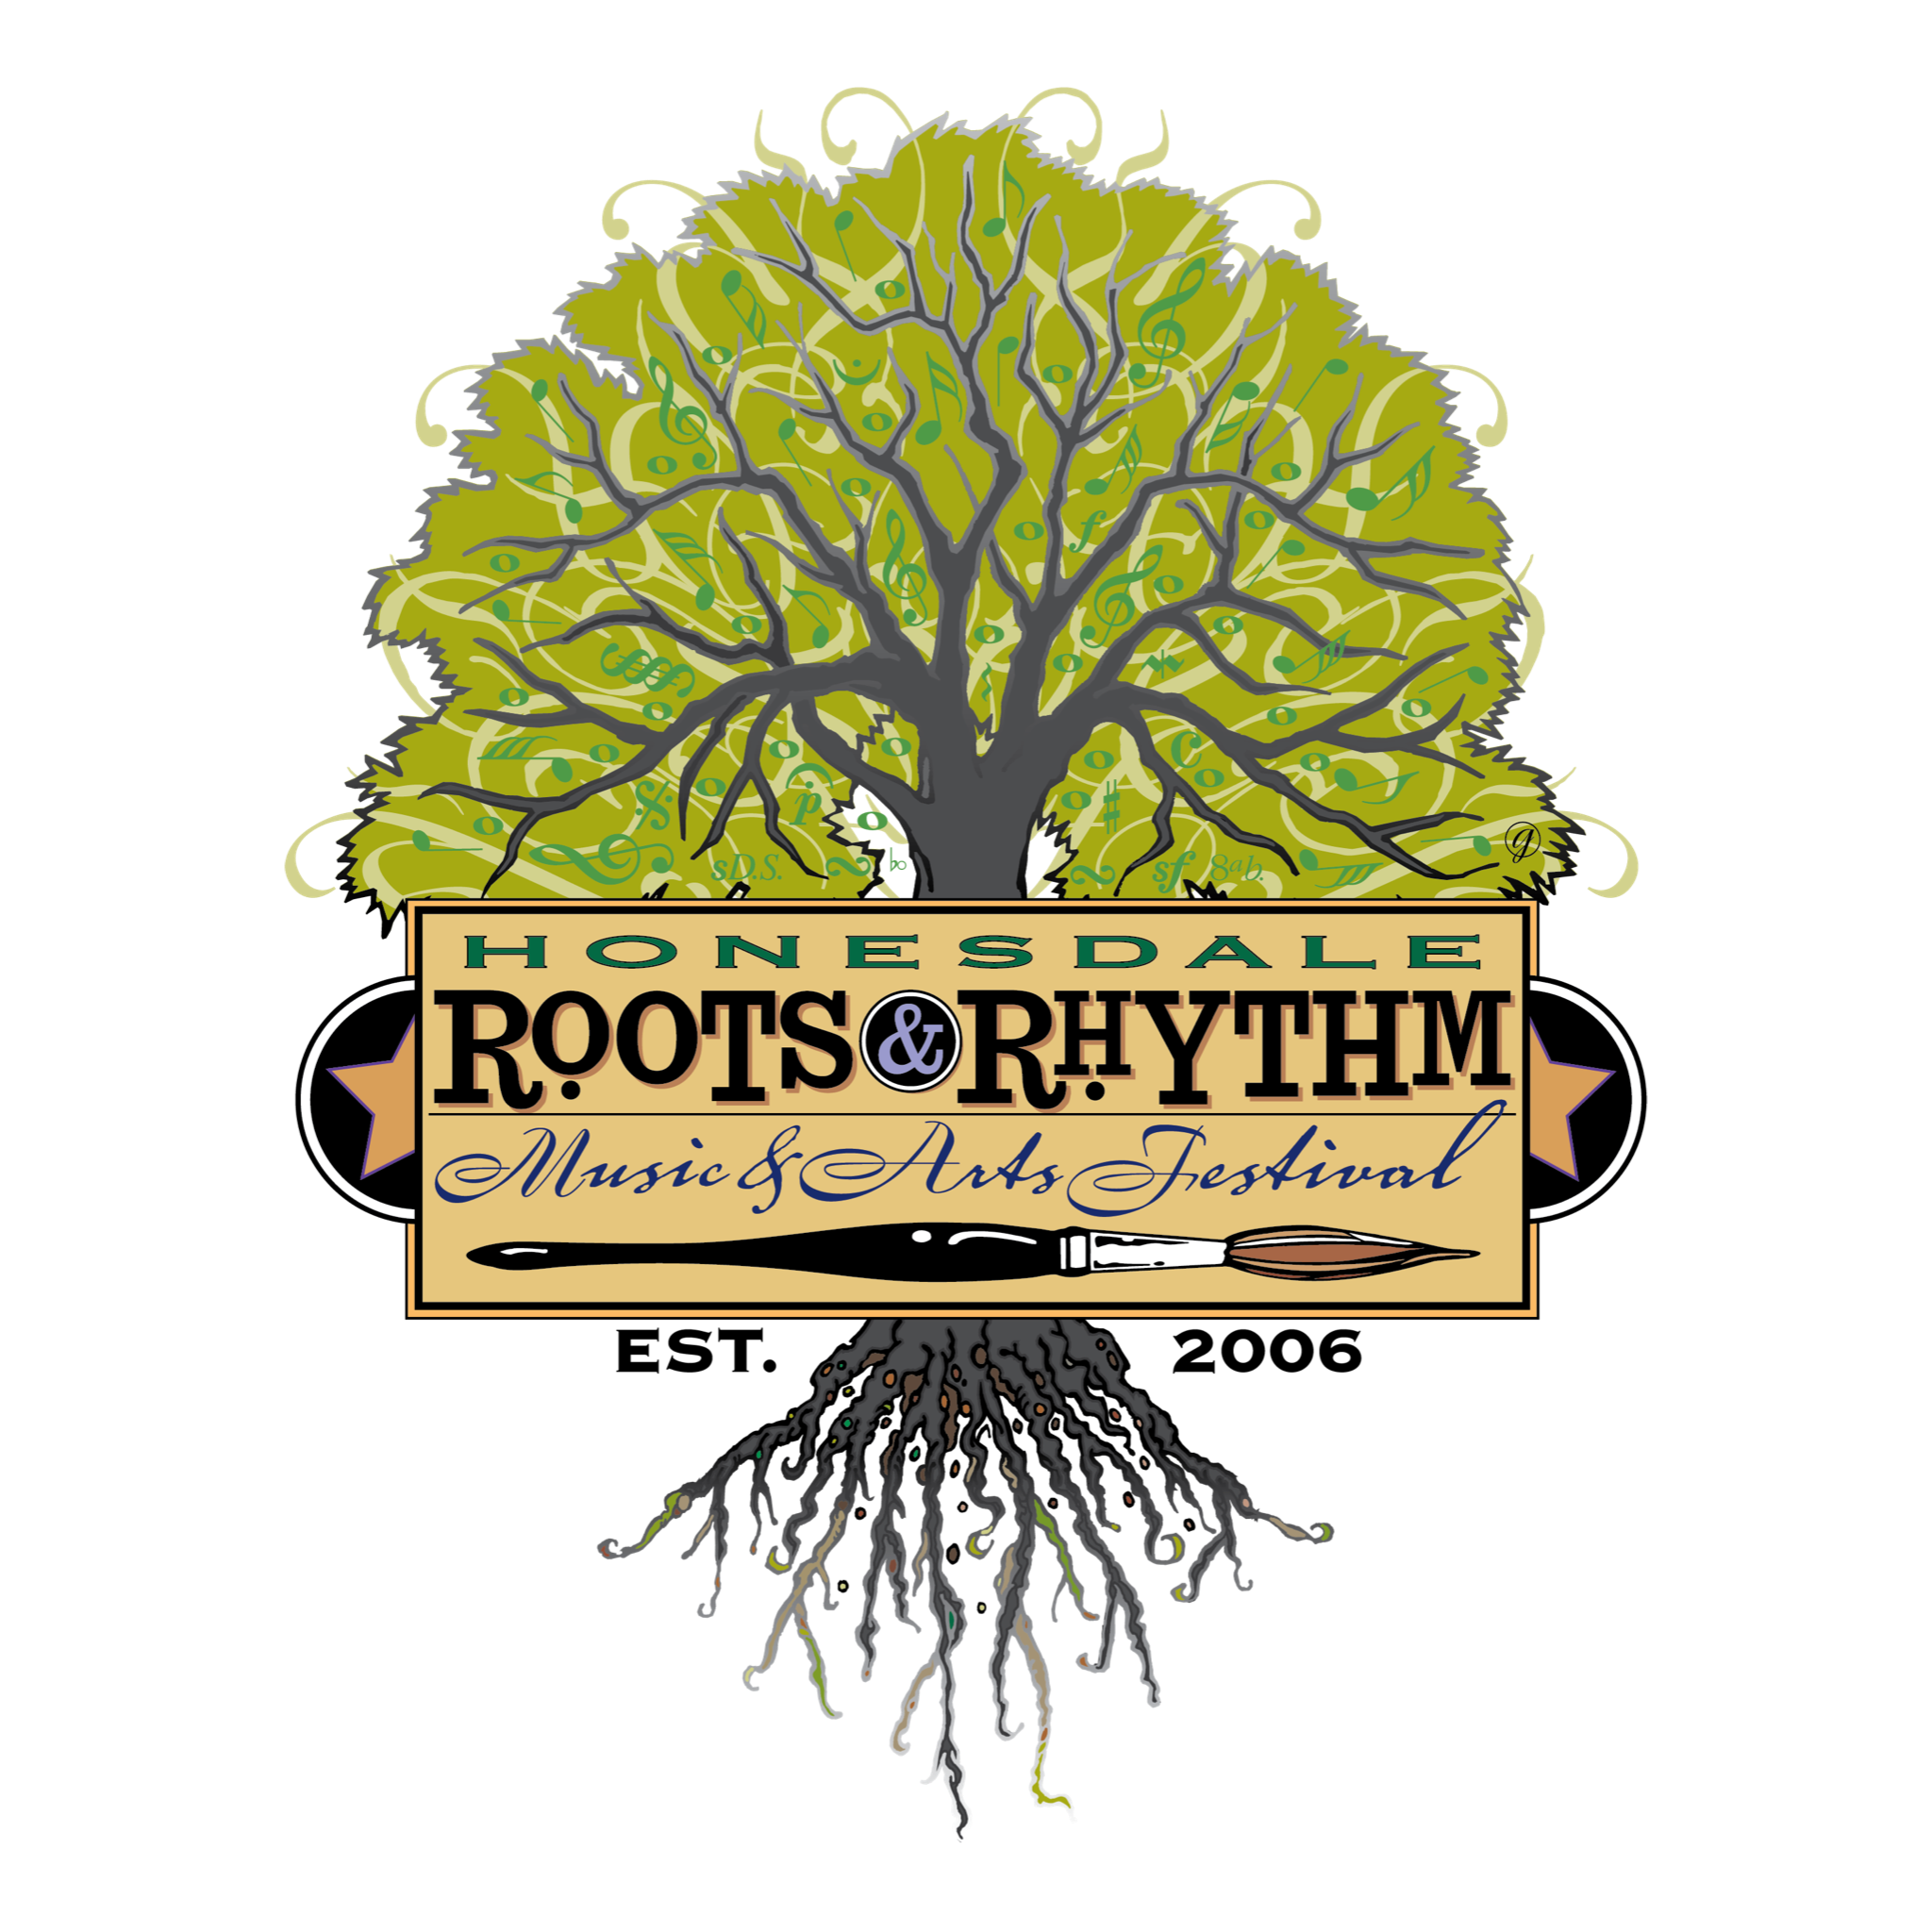 Honesdale Roots & Rhythm Music Festival, Downtown, Honesdale